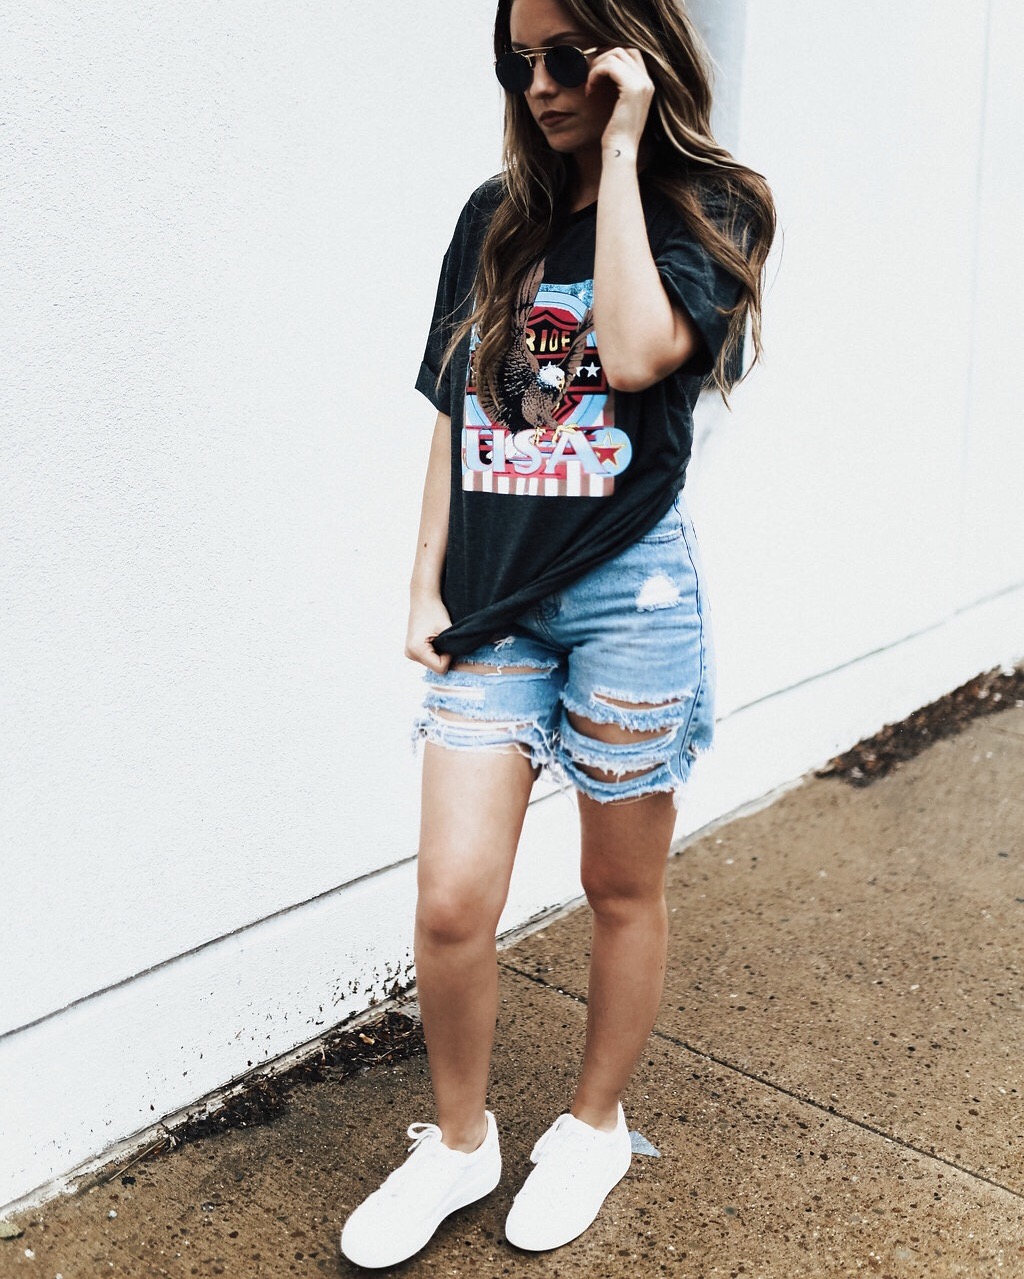 Pittsburgh Life & Personal Style Blog | Jenna Boron of Balance & Chaos | Long Shorts Are The New Short Shorts | Hair Extensions | Featuring: Missguided